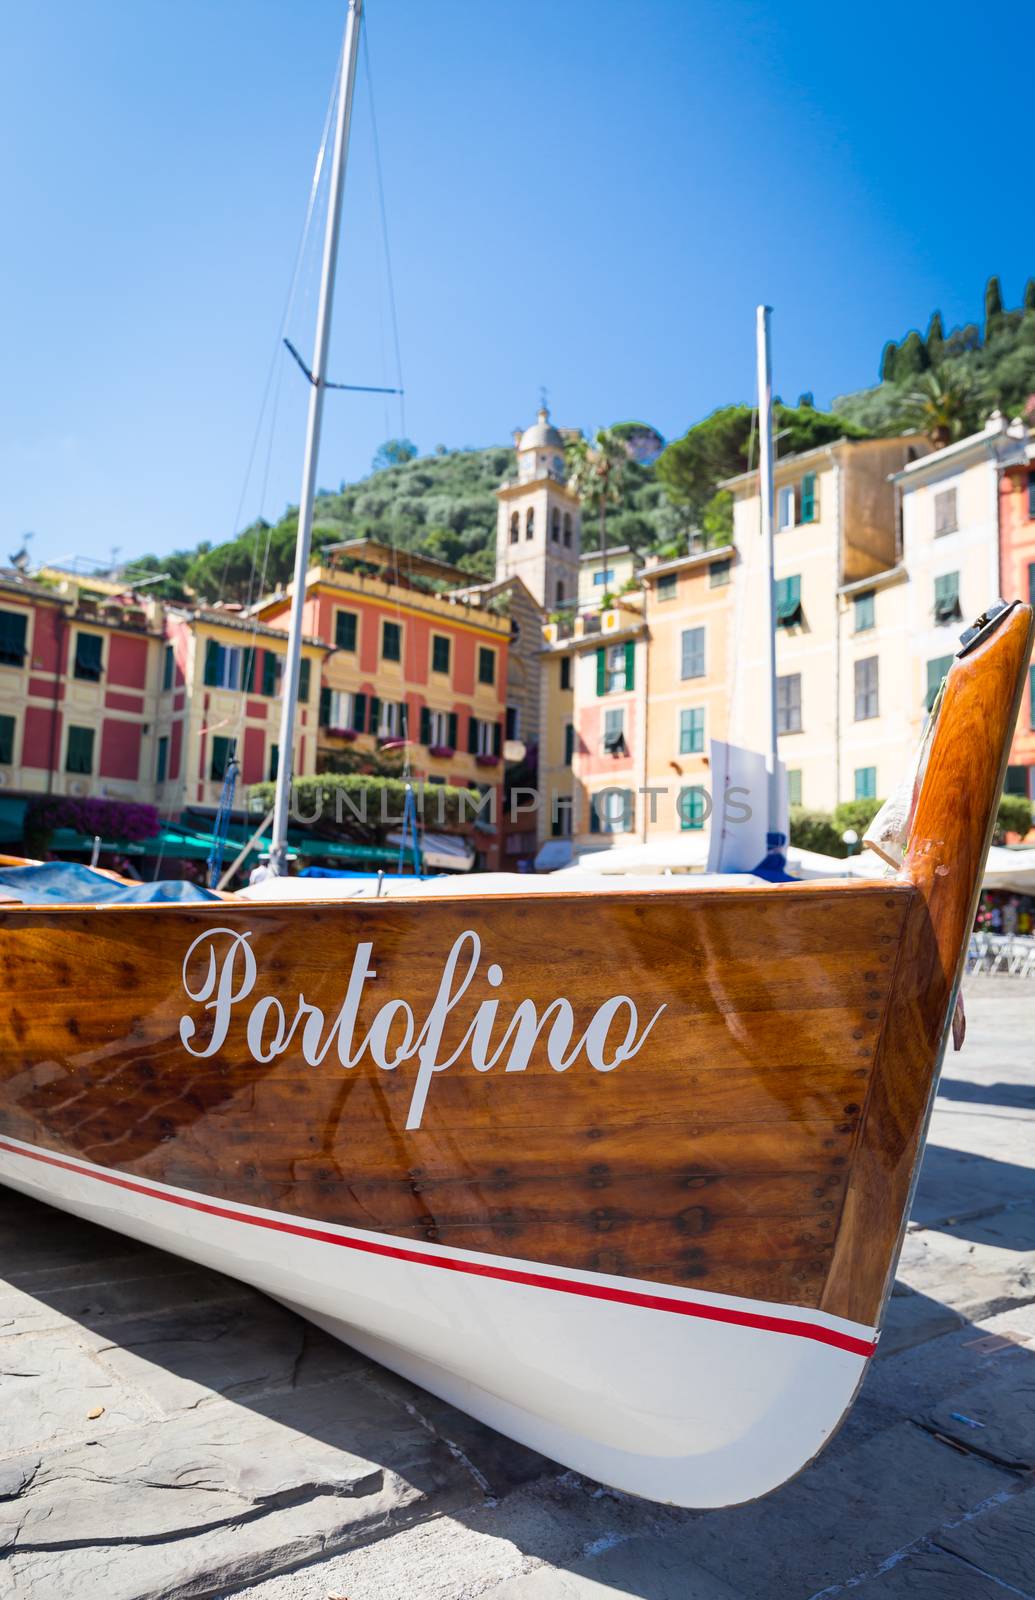 The name of the famous Portofino town in Italy on a boatside - landmark sign, no copyright